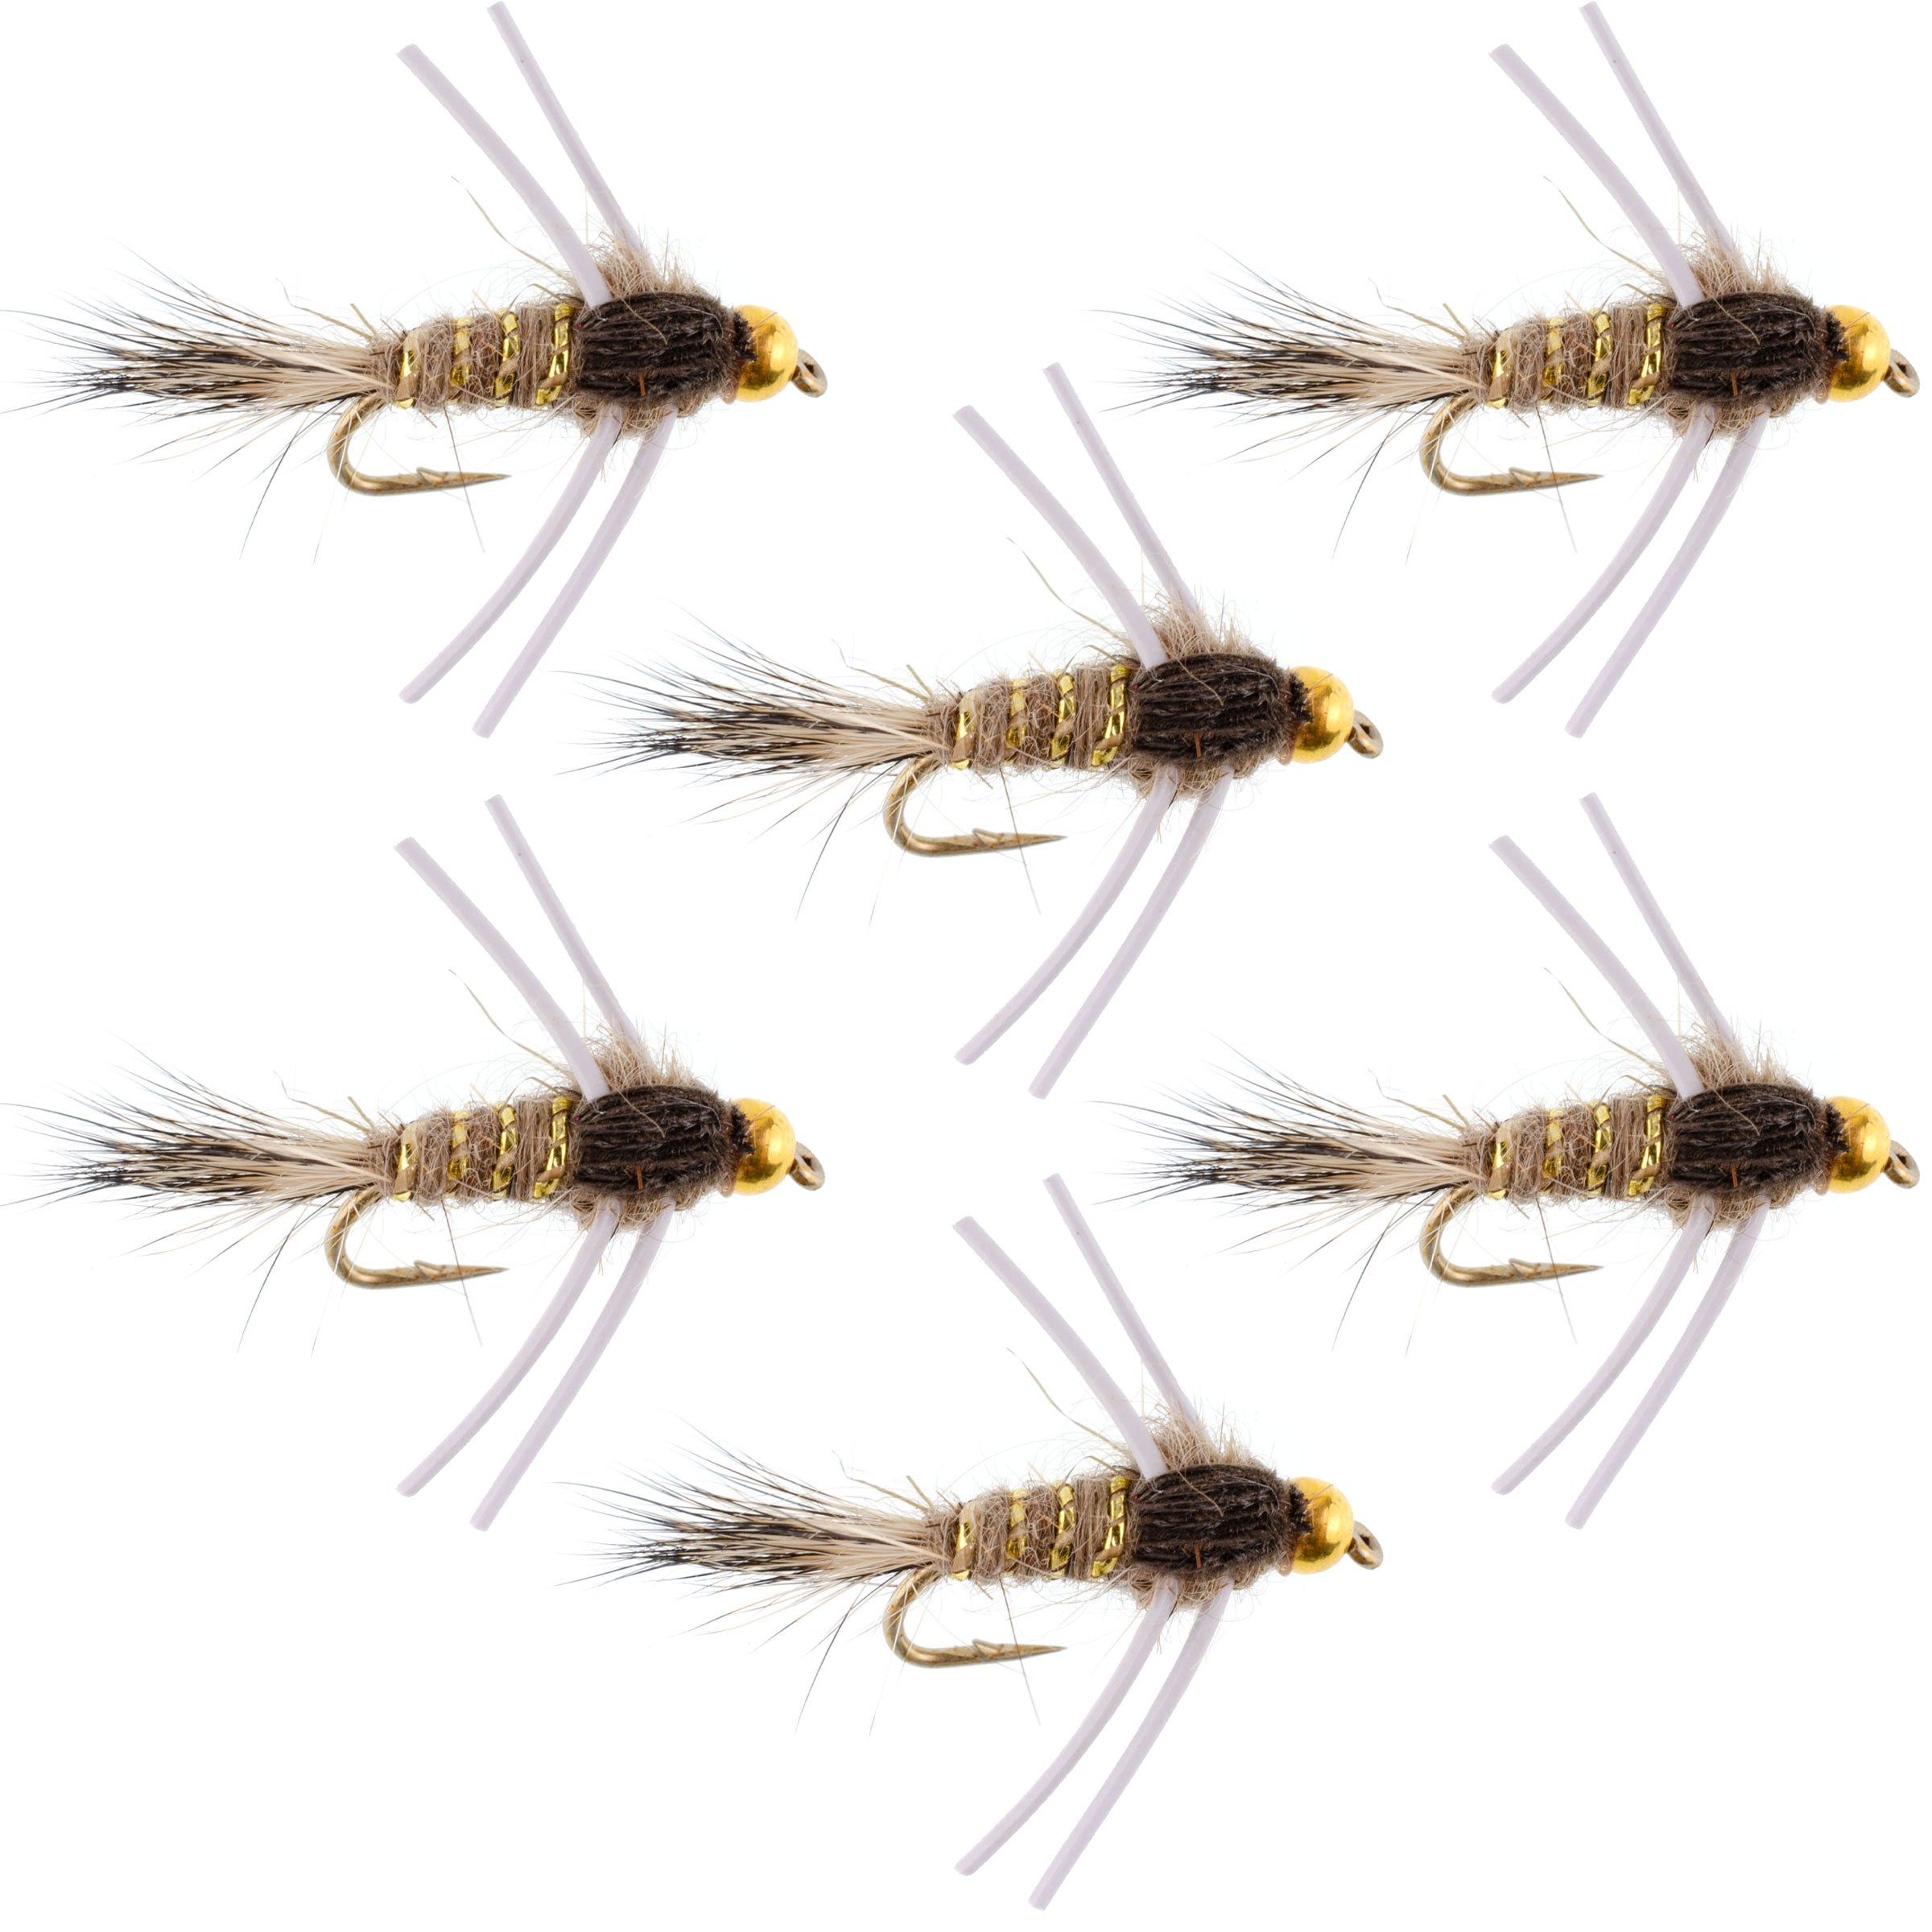 Tungsten Bead Head Rubber Legs Natural Gold-Ribbed Hare's Ear Trout Fly Nymph - 6 Flies Hook Size 14